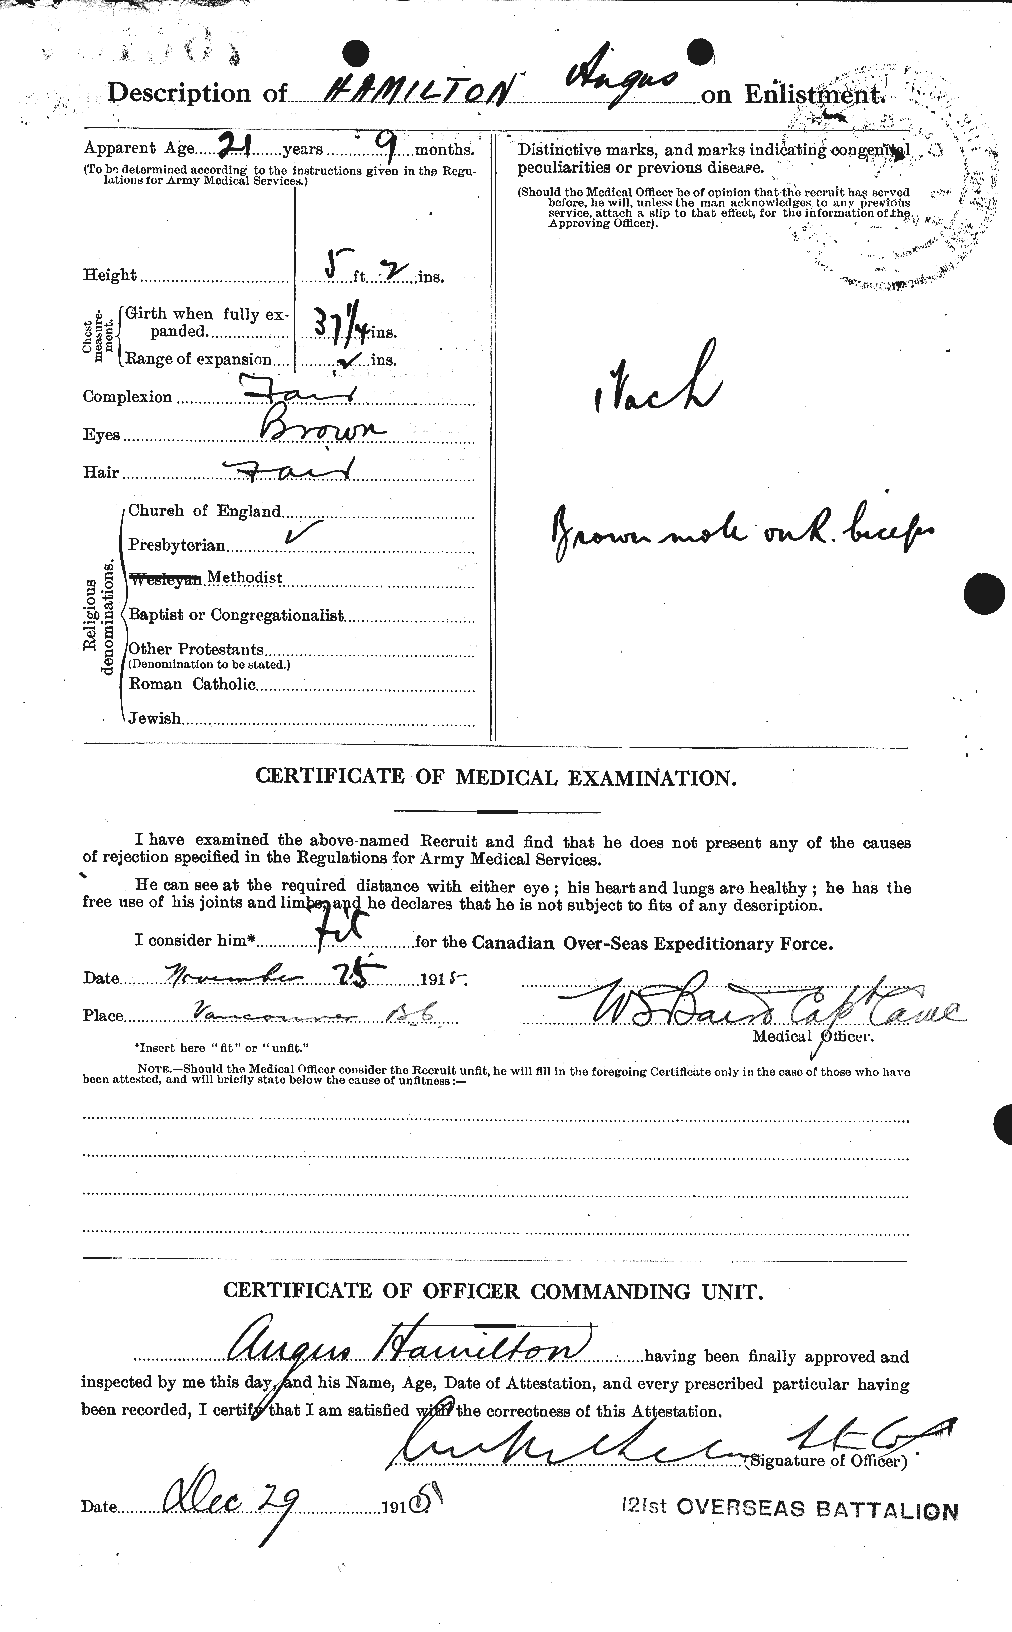 Personnel Records of the First World War - CEF 375236b